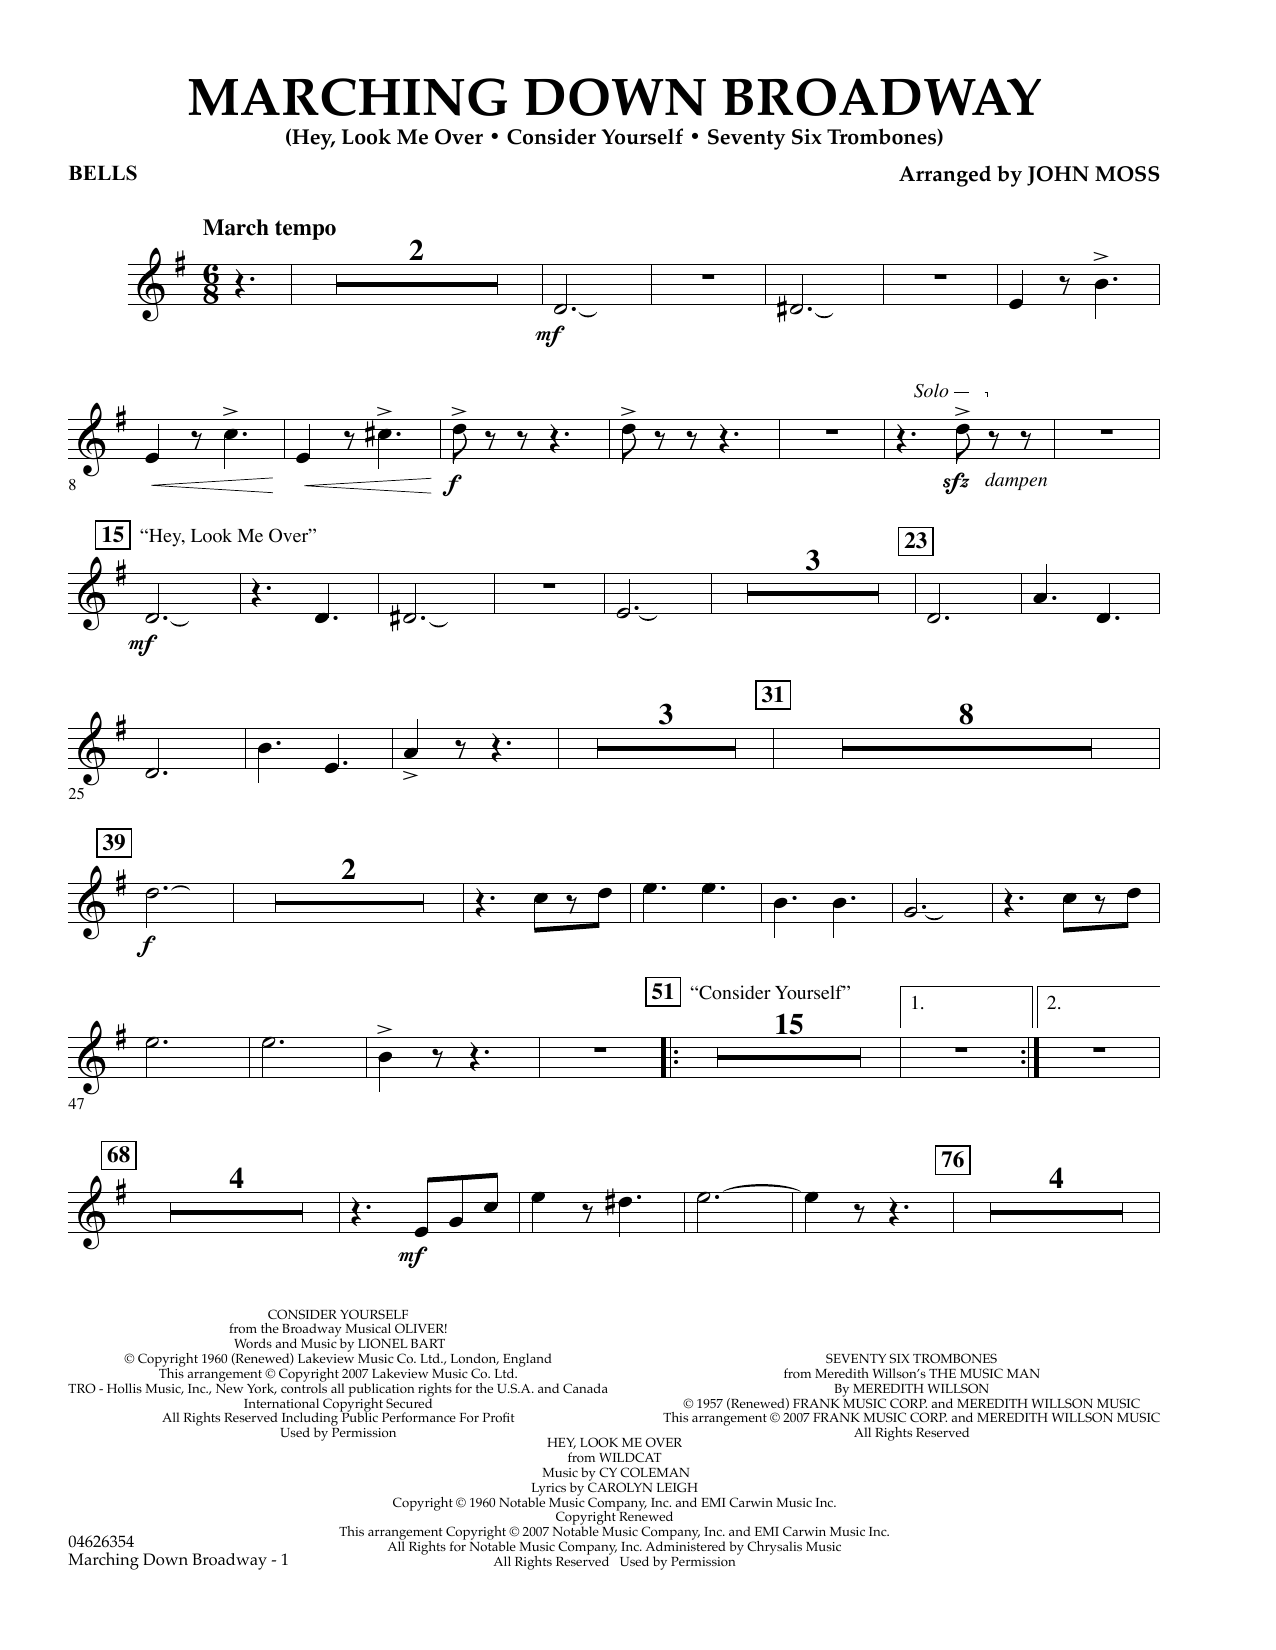 John Moss Marching Down Broadway - Bells sheet music preview music notes and score for Orchestra including 2 page(s)